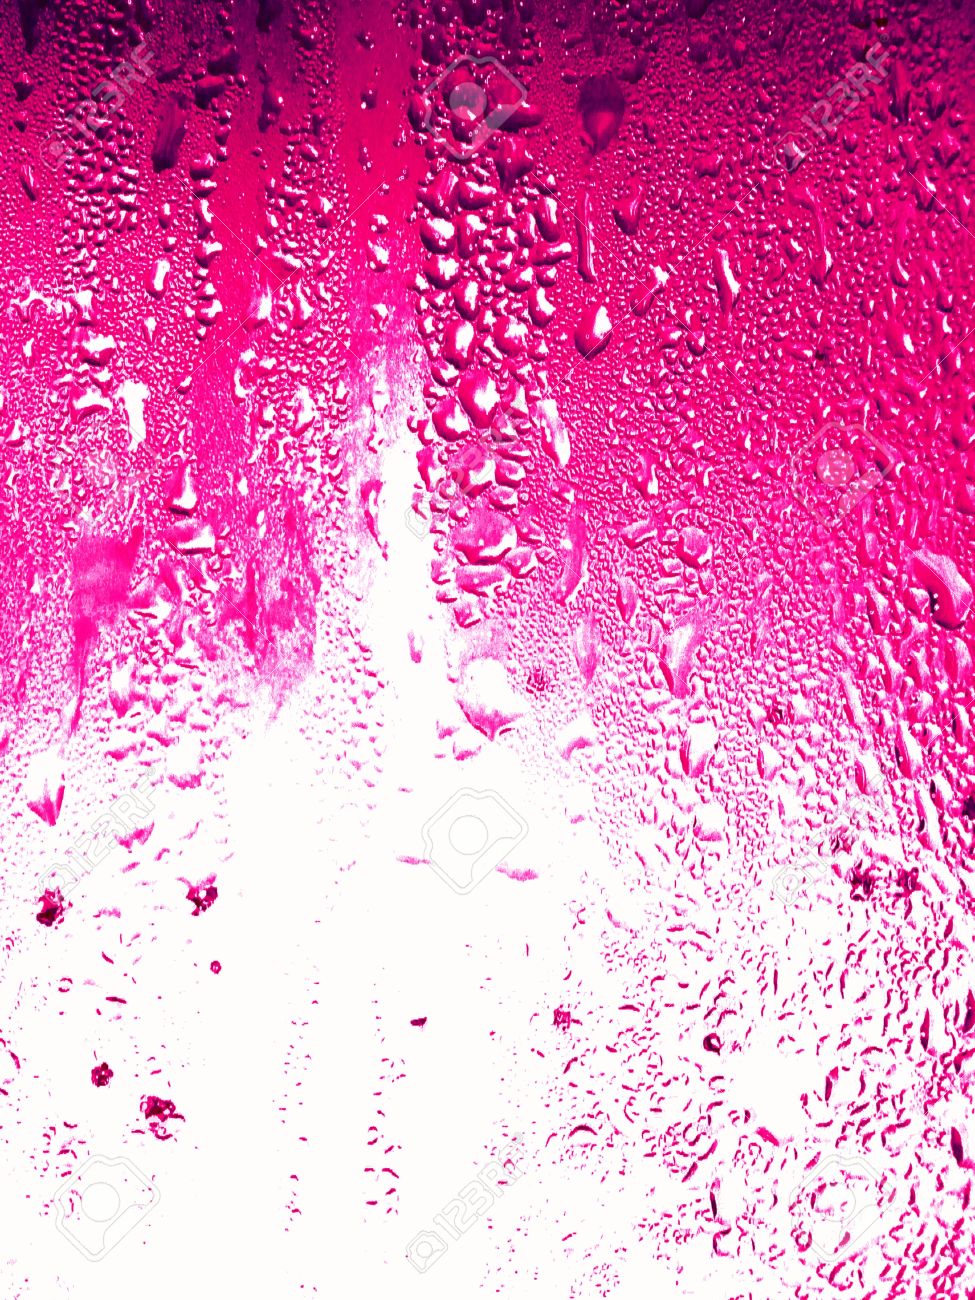 Fruit Pink Soda Background Texture Full Of Little Water Drops